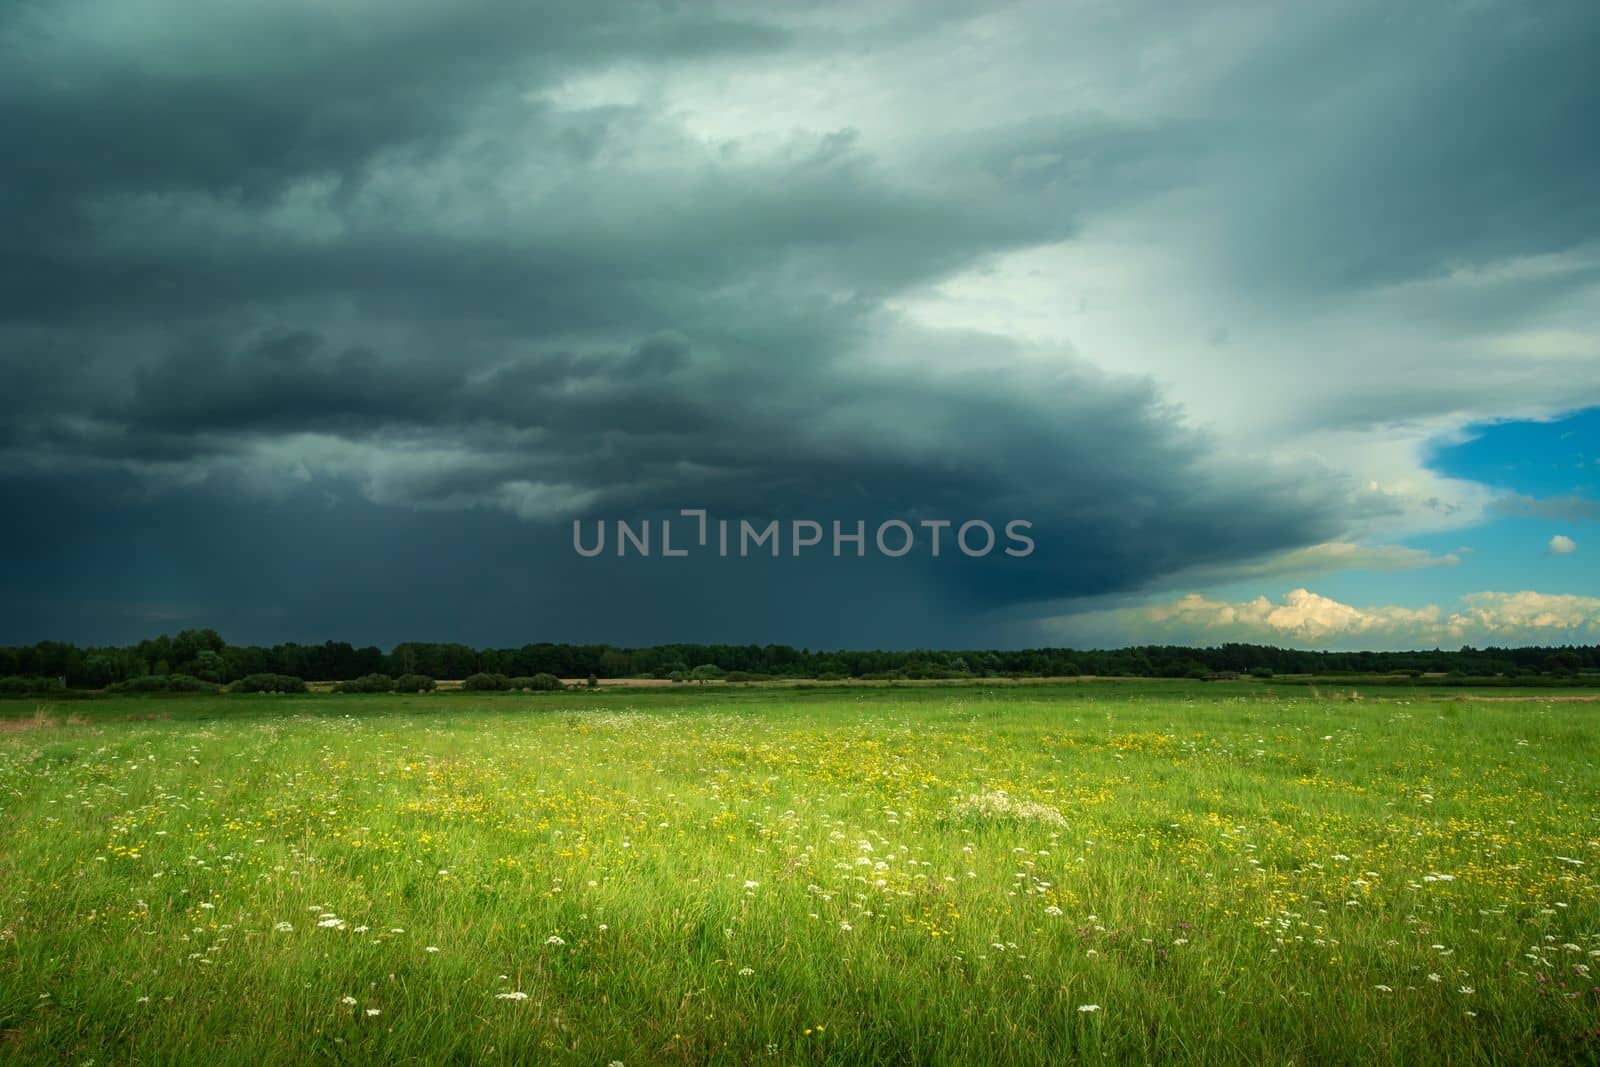 View of the dark thundercloud above the meadow by darekb22